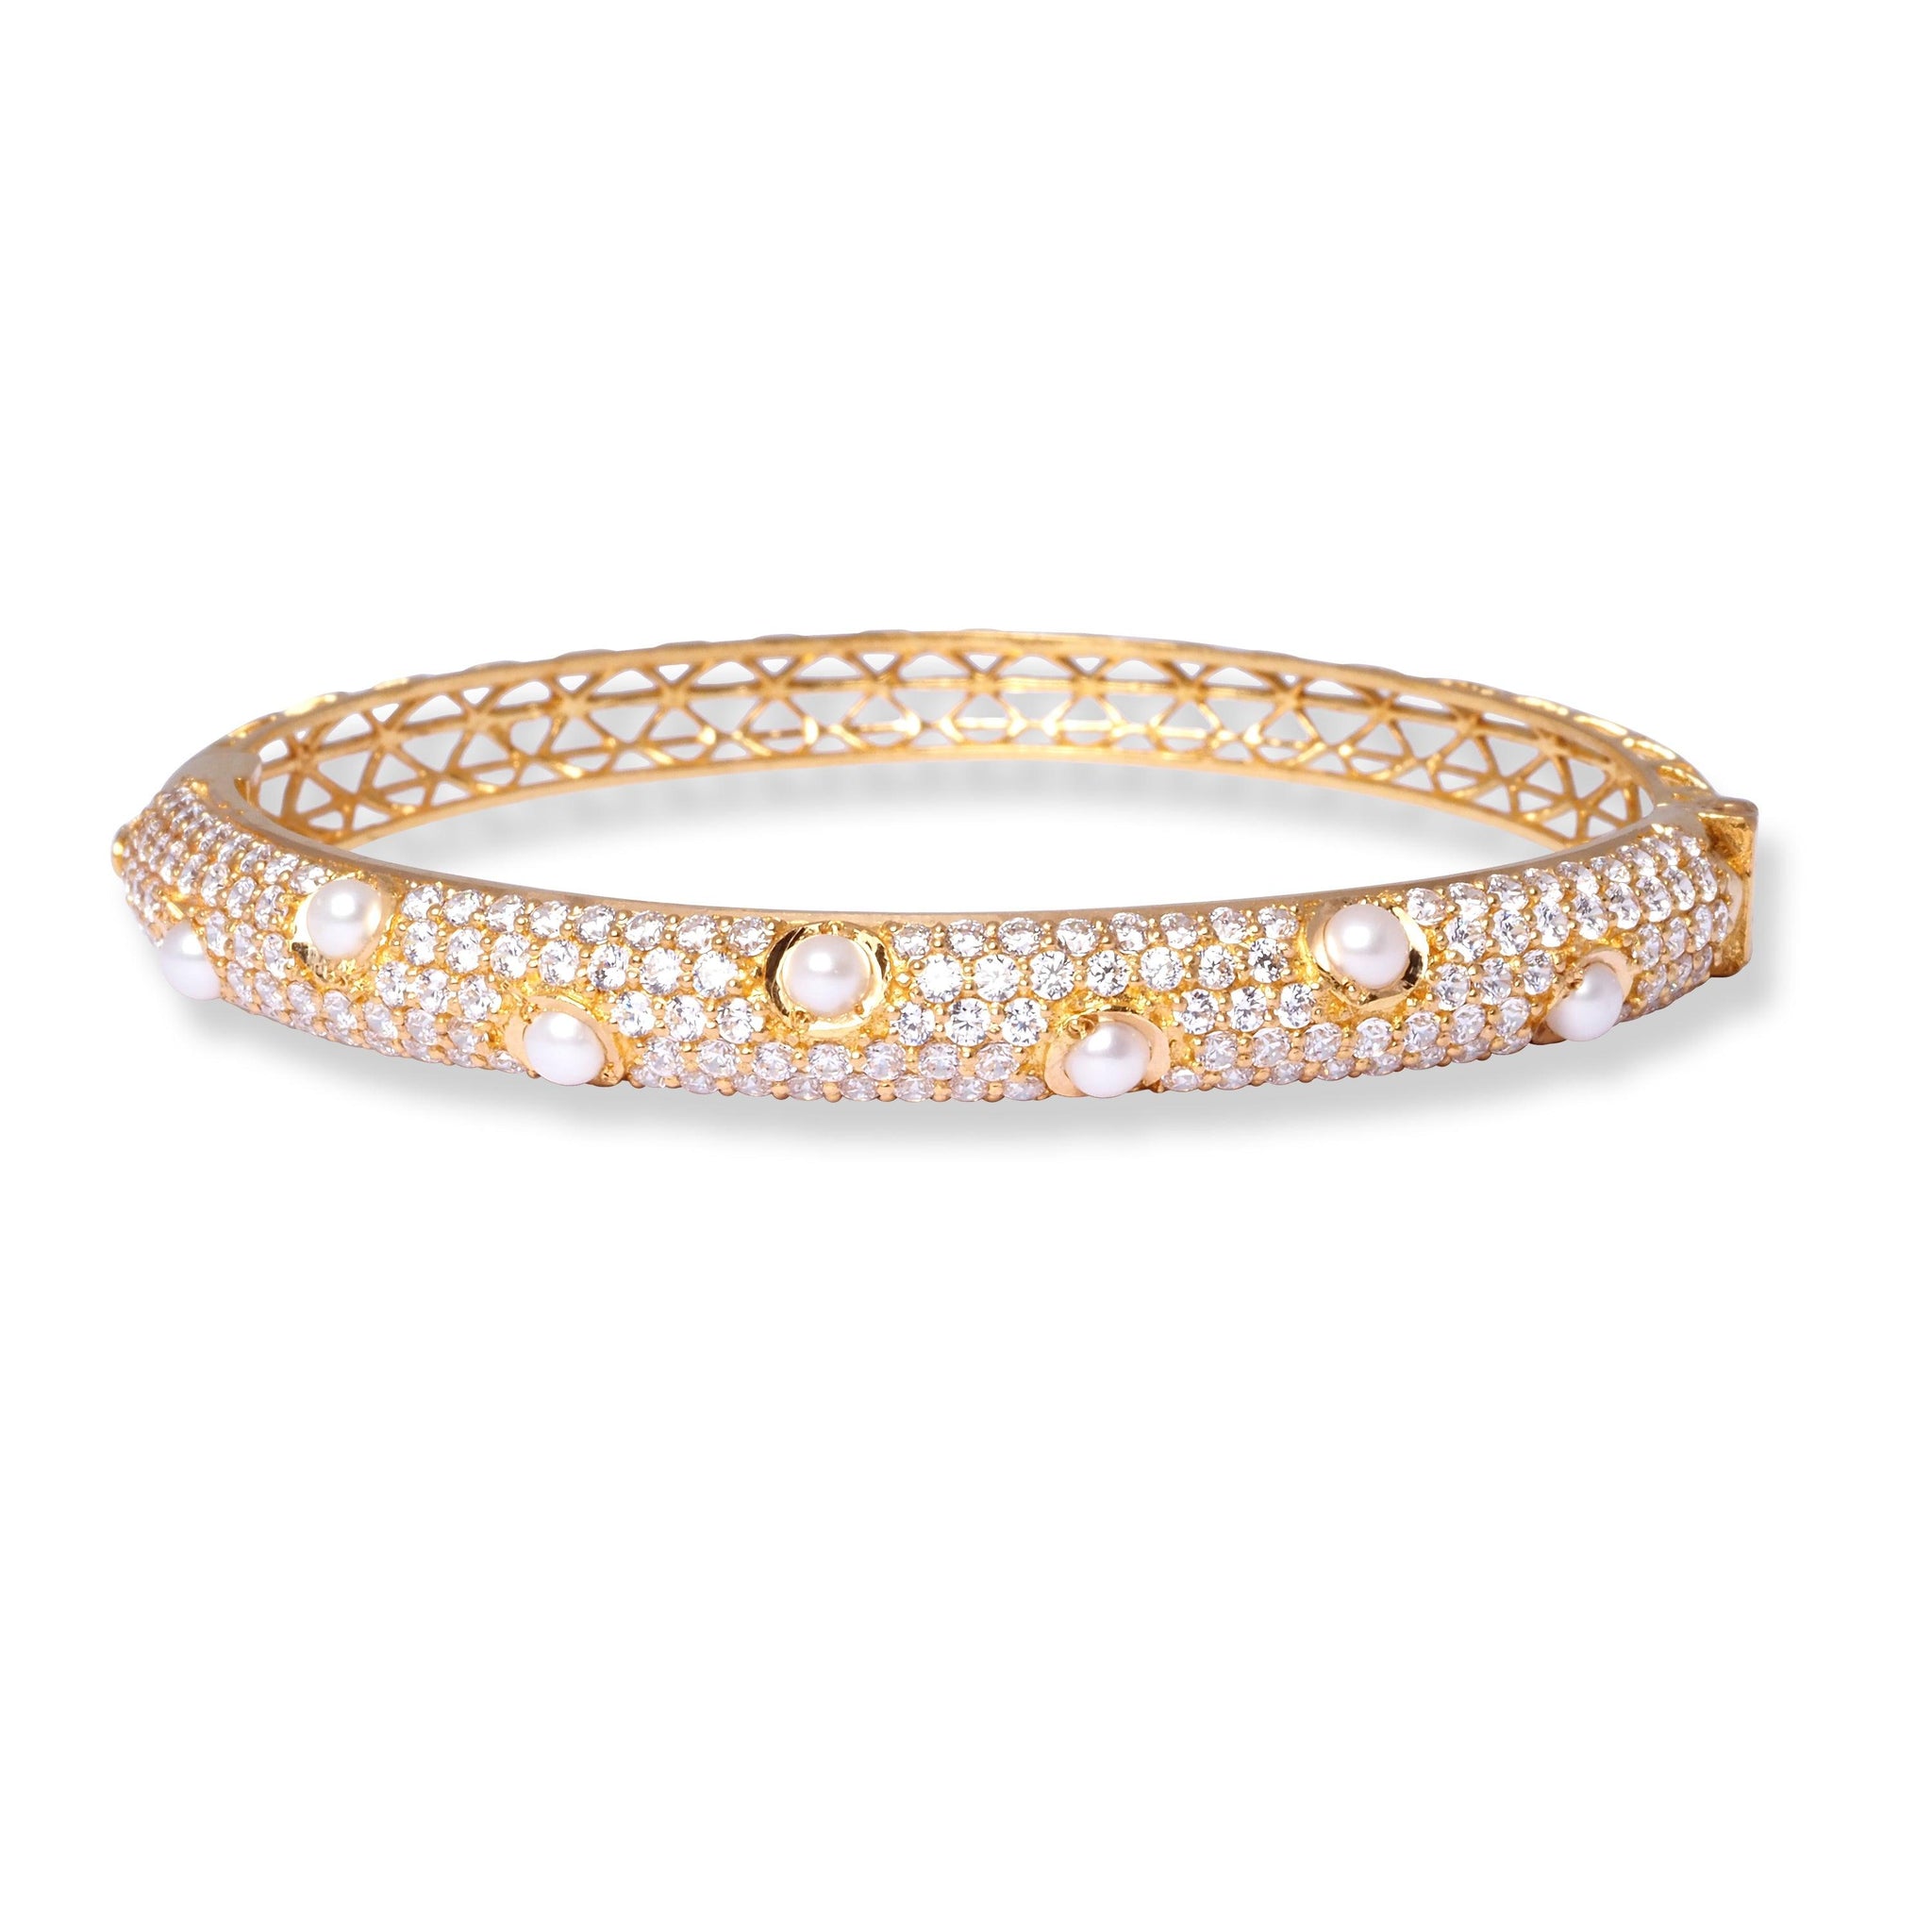 22ct Gold Openable Bangle with Cultured Pearls and Cubic Zirconia Stones B-8556